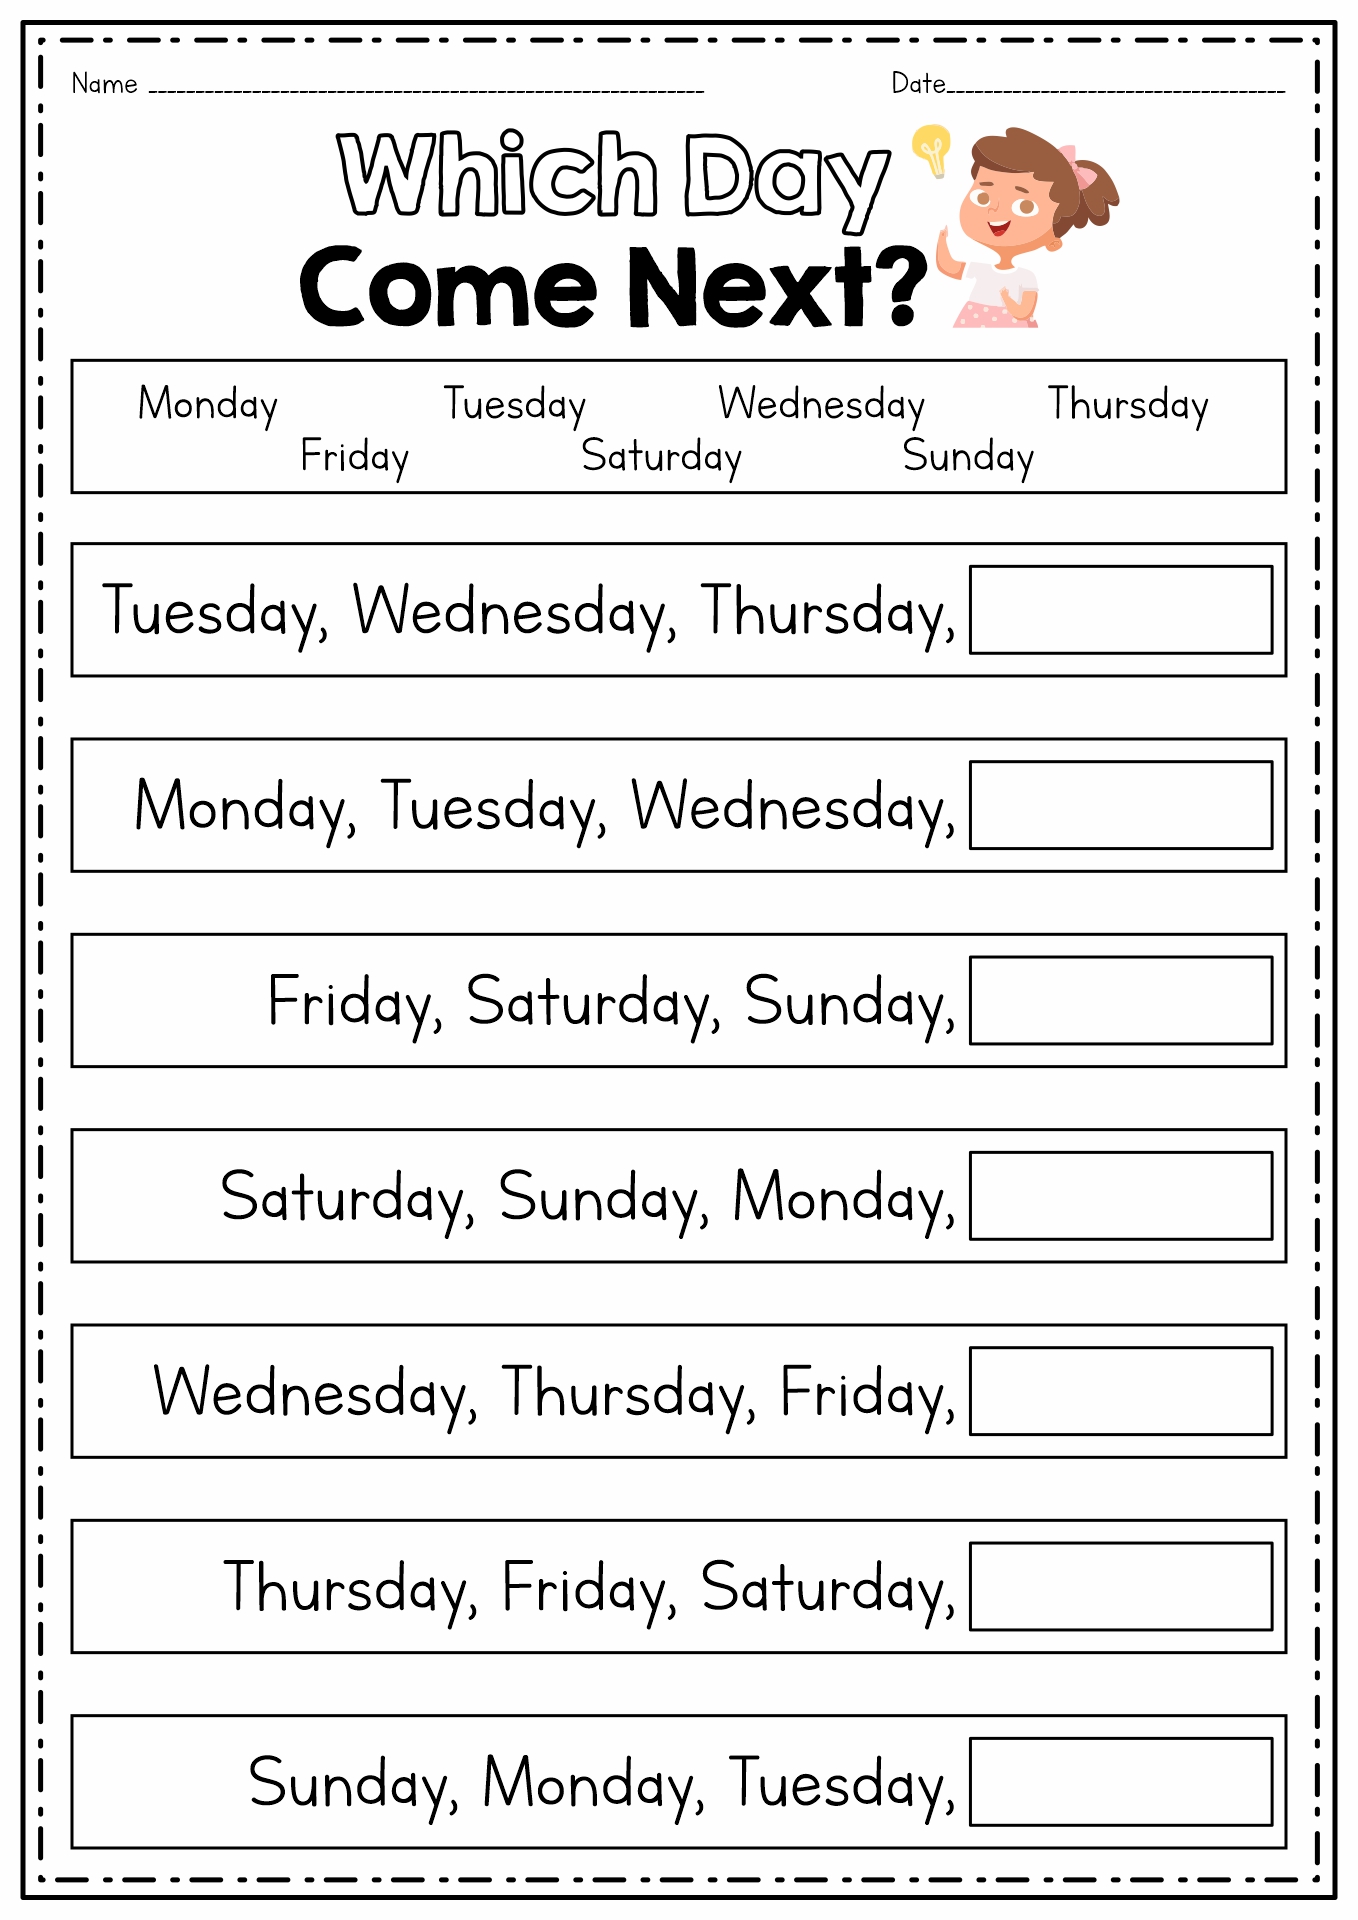 Days of the Week Worksheets First Grade Image